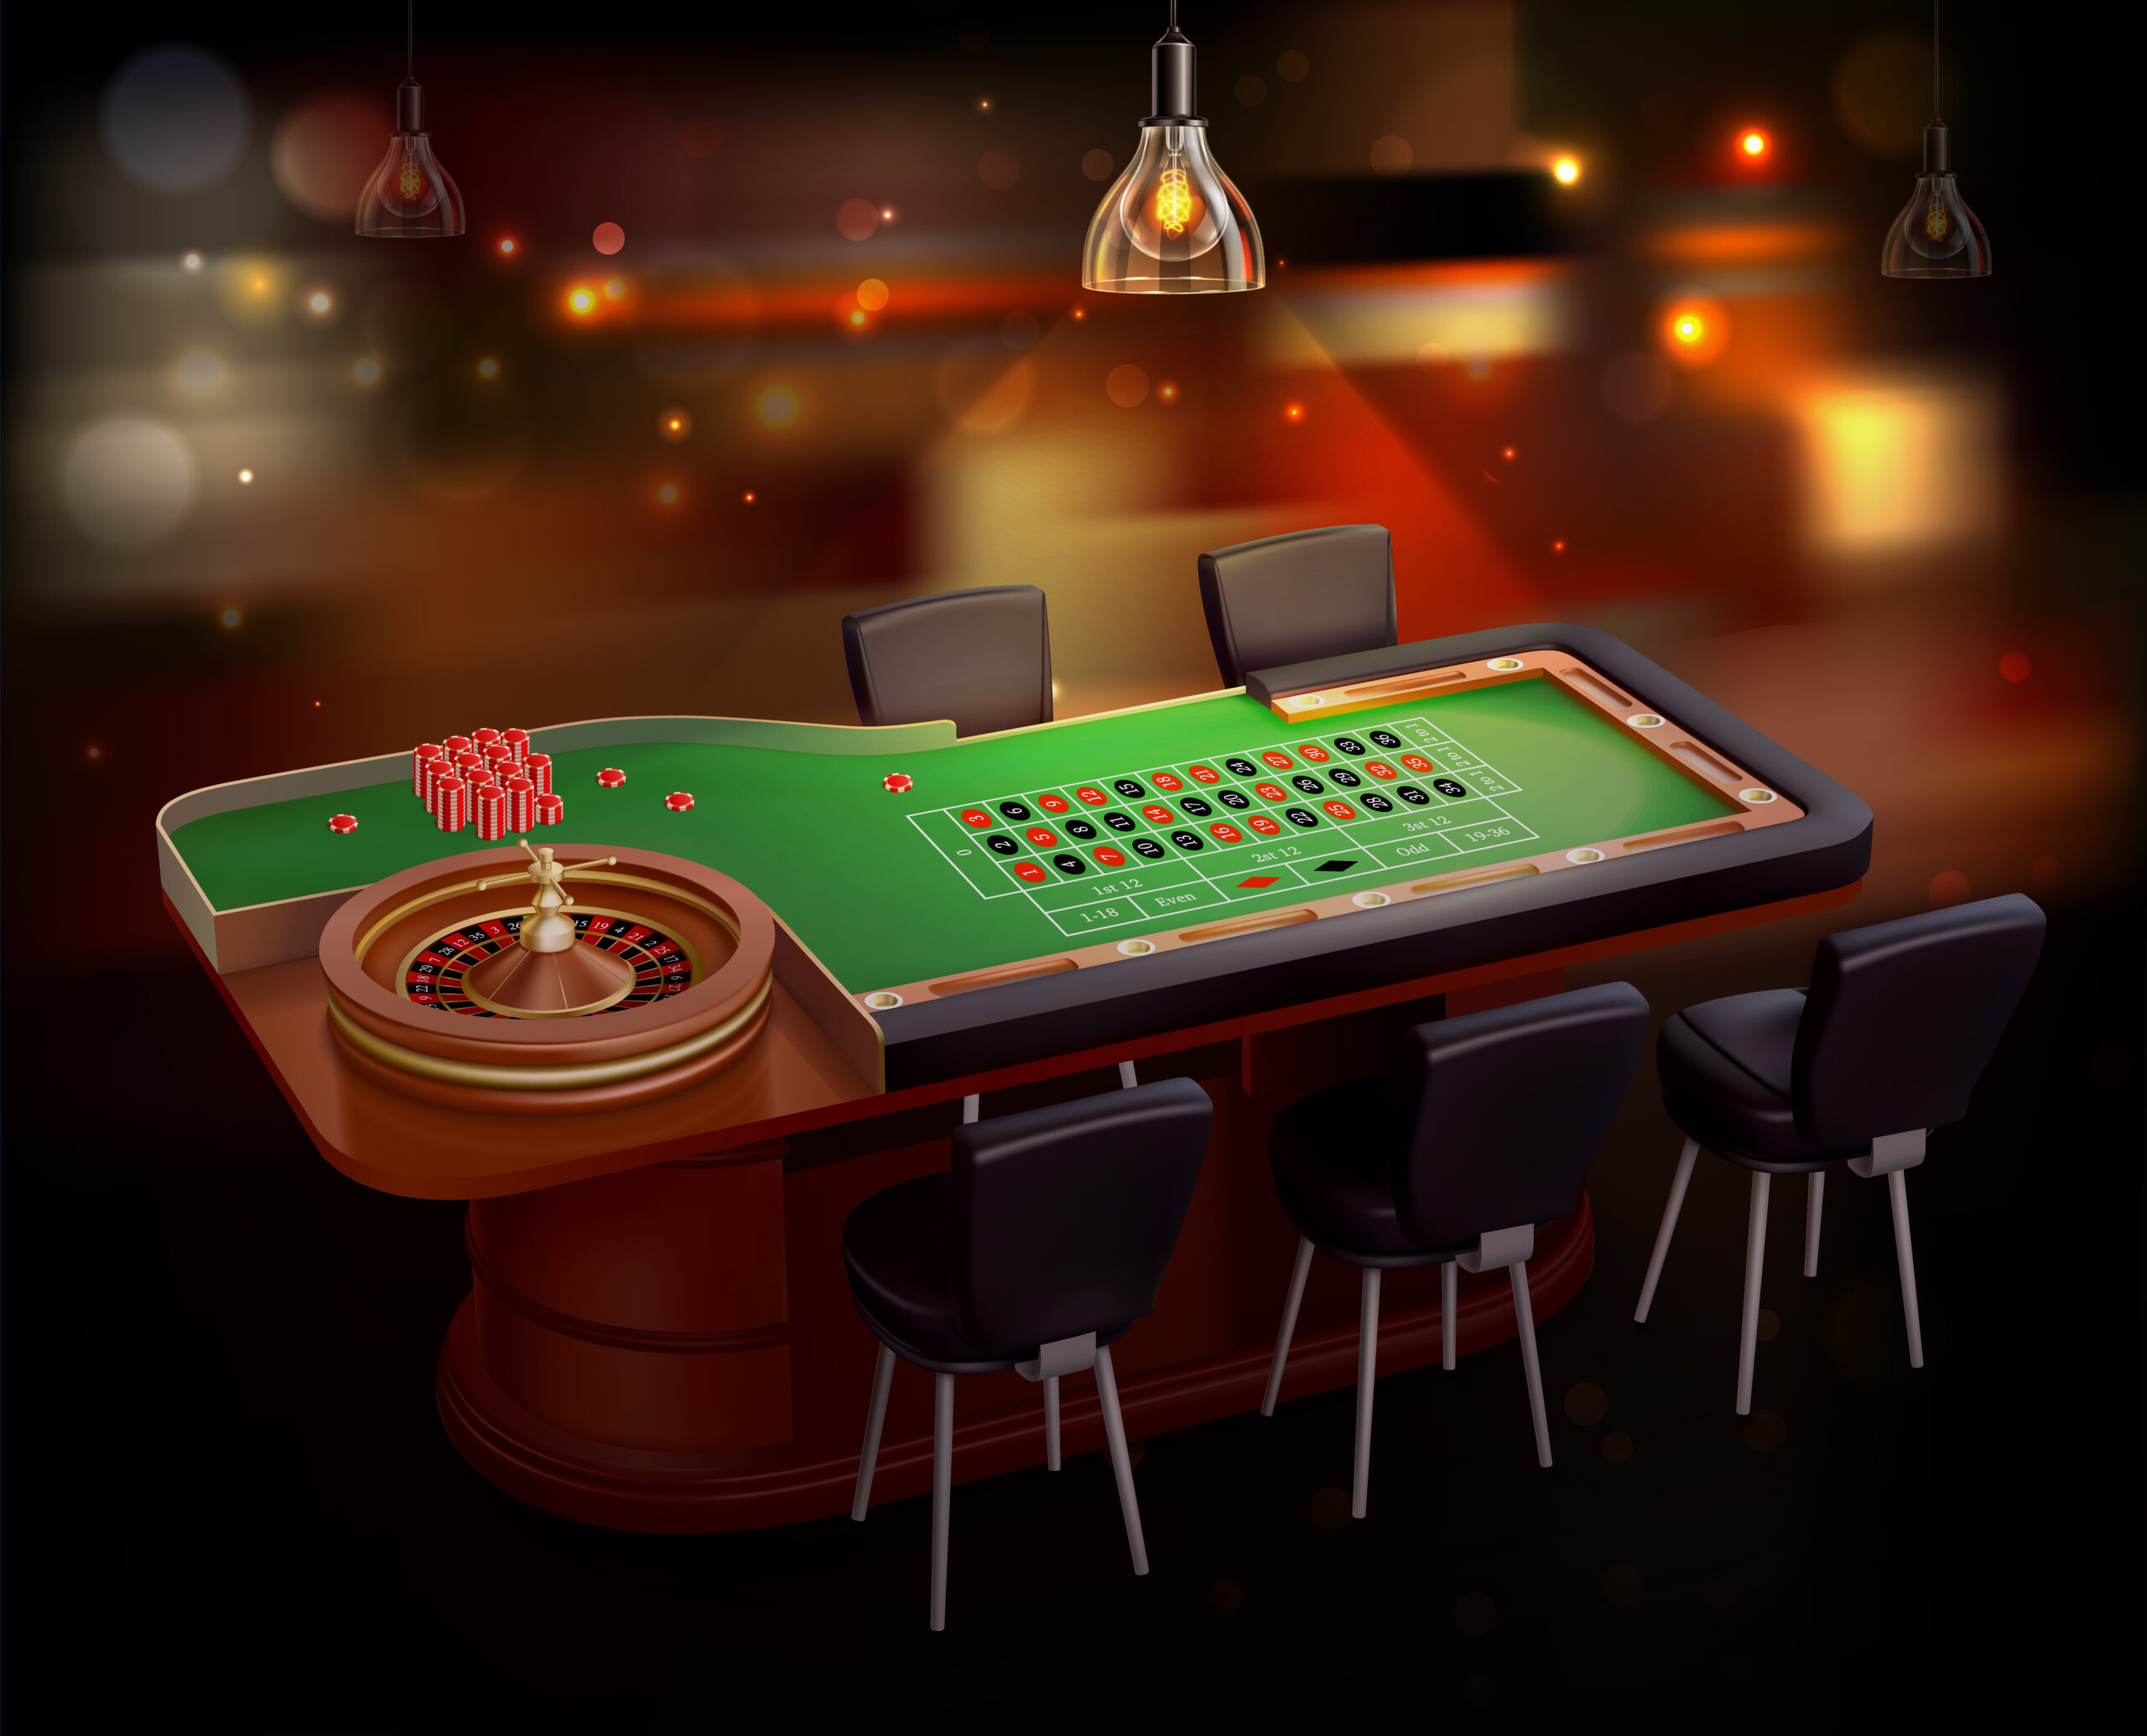 Malaysia’s Finest: Top Online Casino and Slot Game Adventures Await